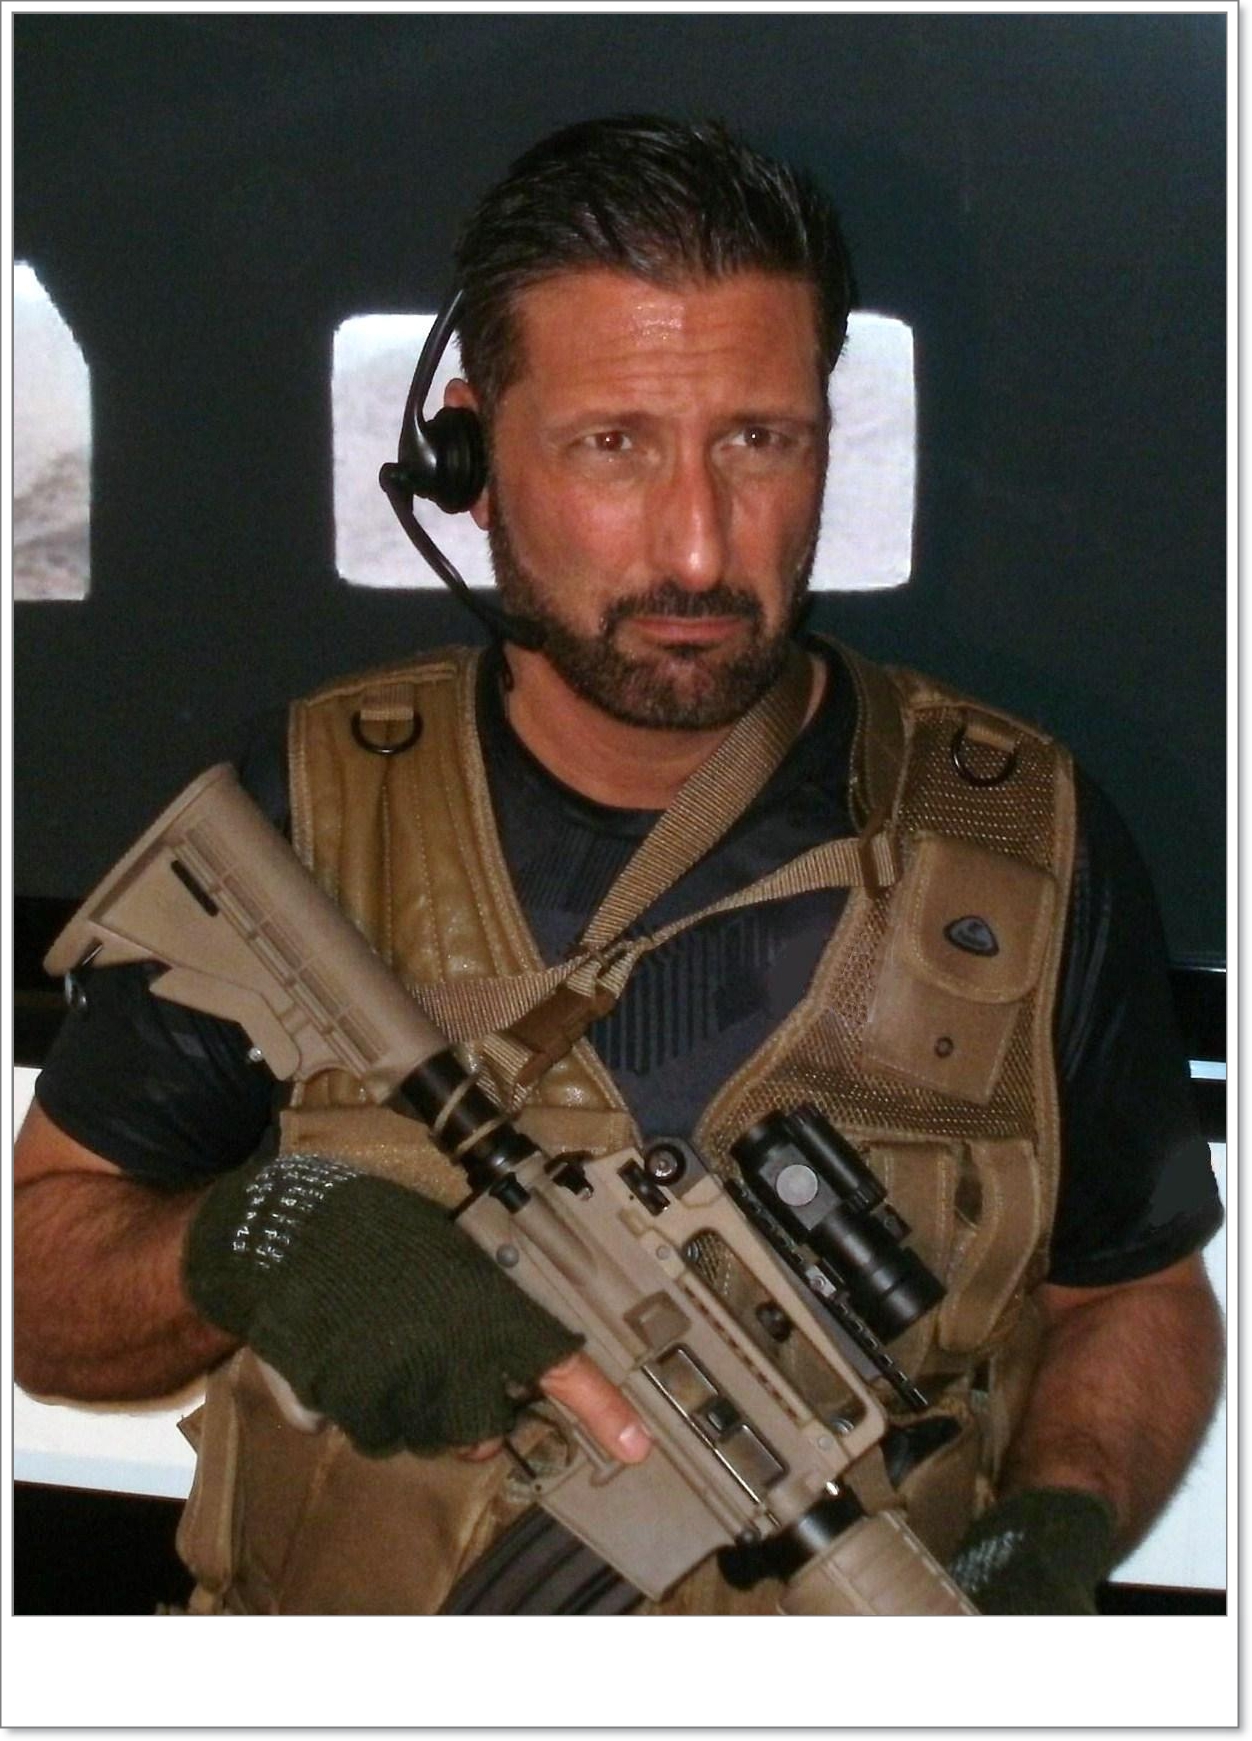 Adam Dispirito to star as CIA agent in special forces drama series with real former Navy Seals and Delta Force operators. Target date late 2014. Photo used with permission.